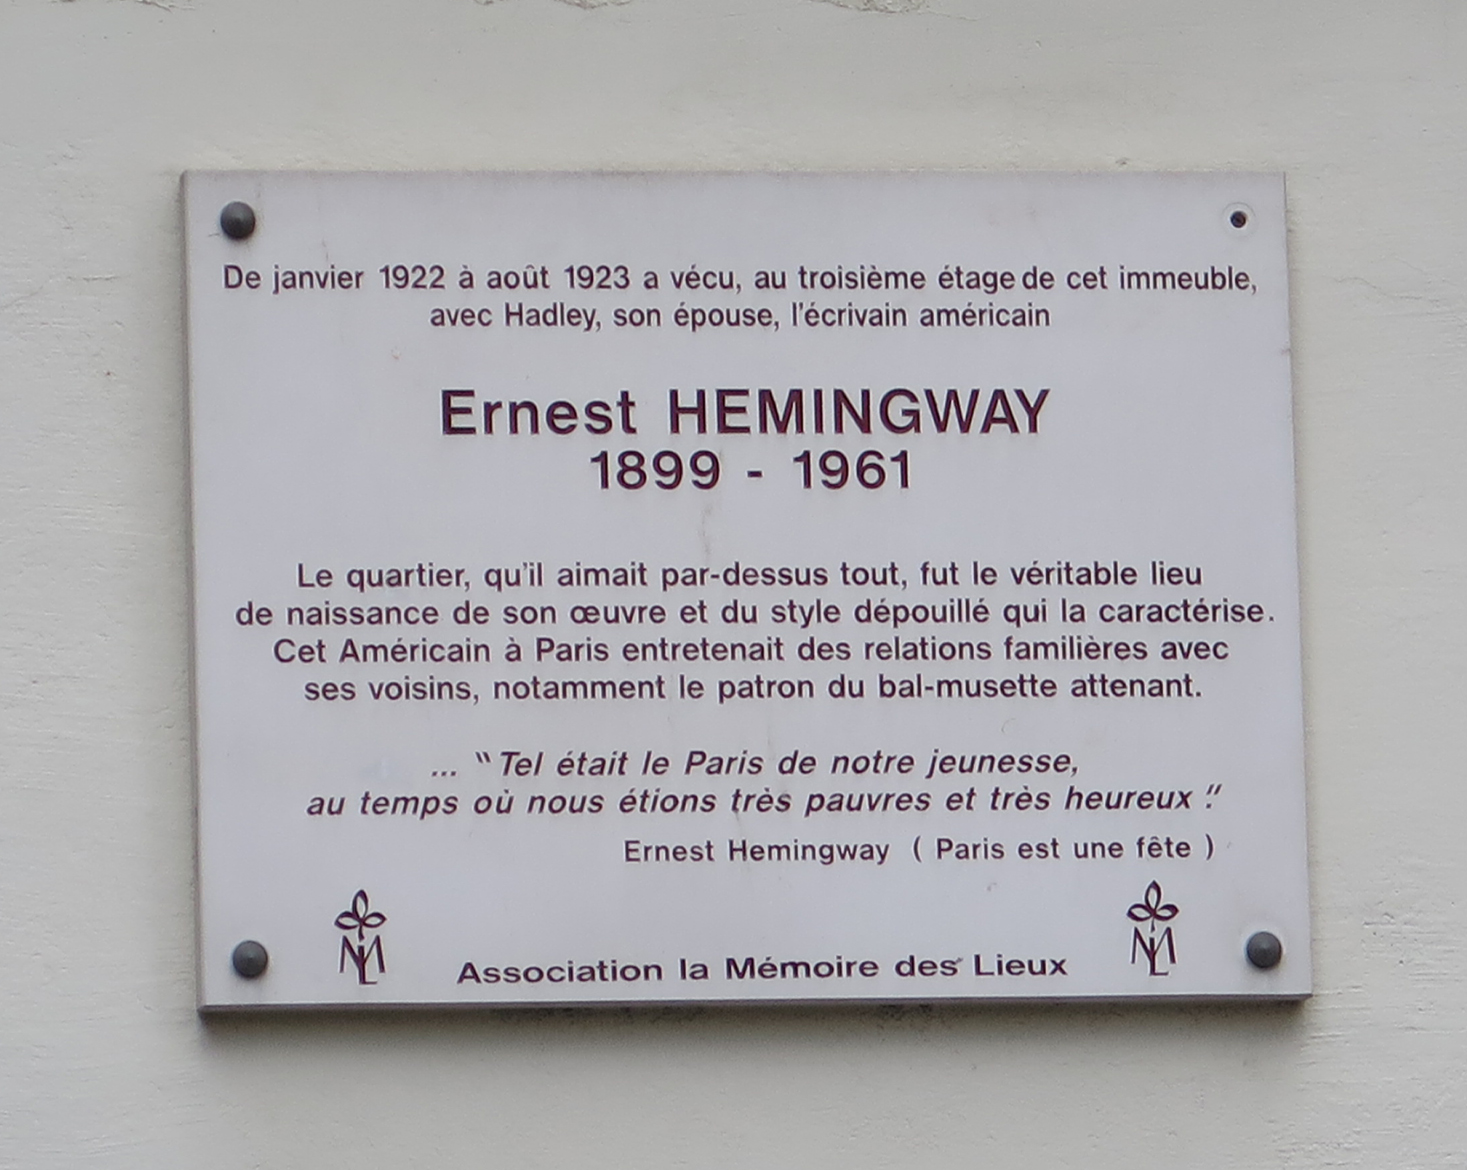 Writers will visit several popular stomping grounds of literary icon Ernest Hemmingway during the Left Bank Writers Retreat.